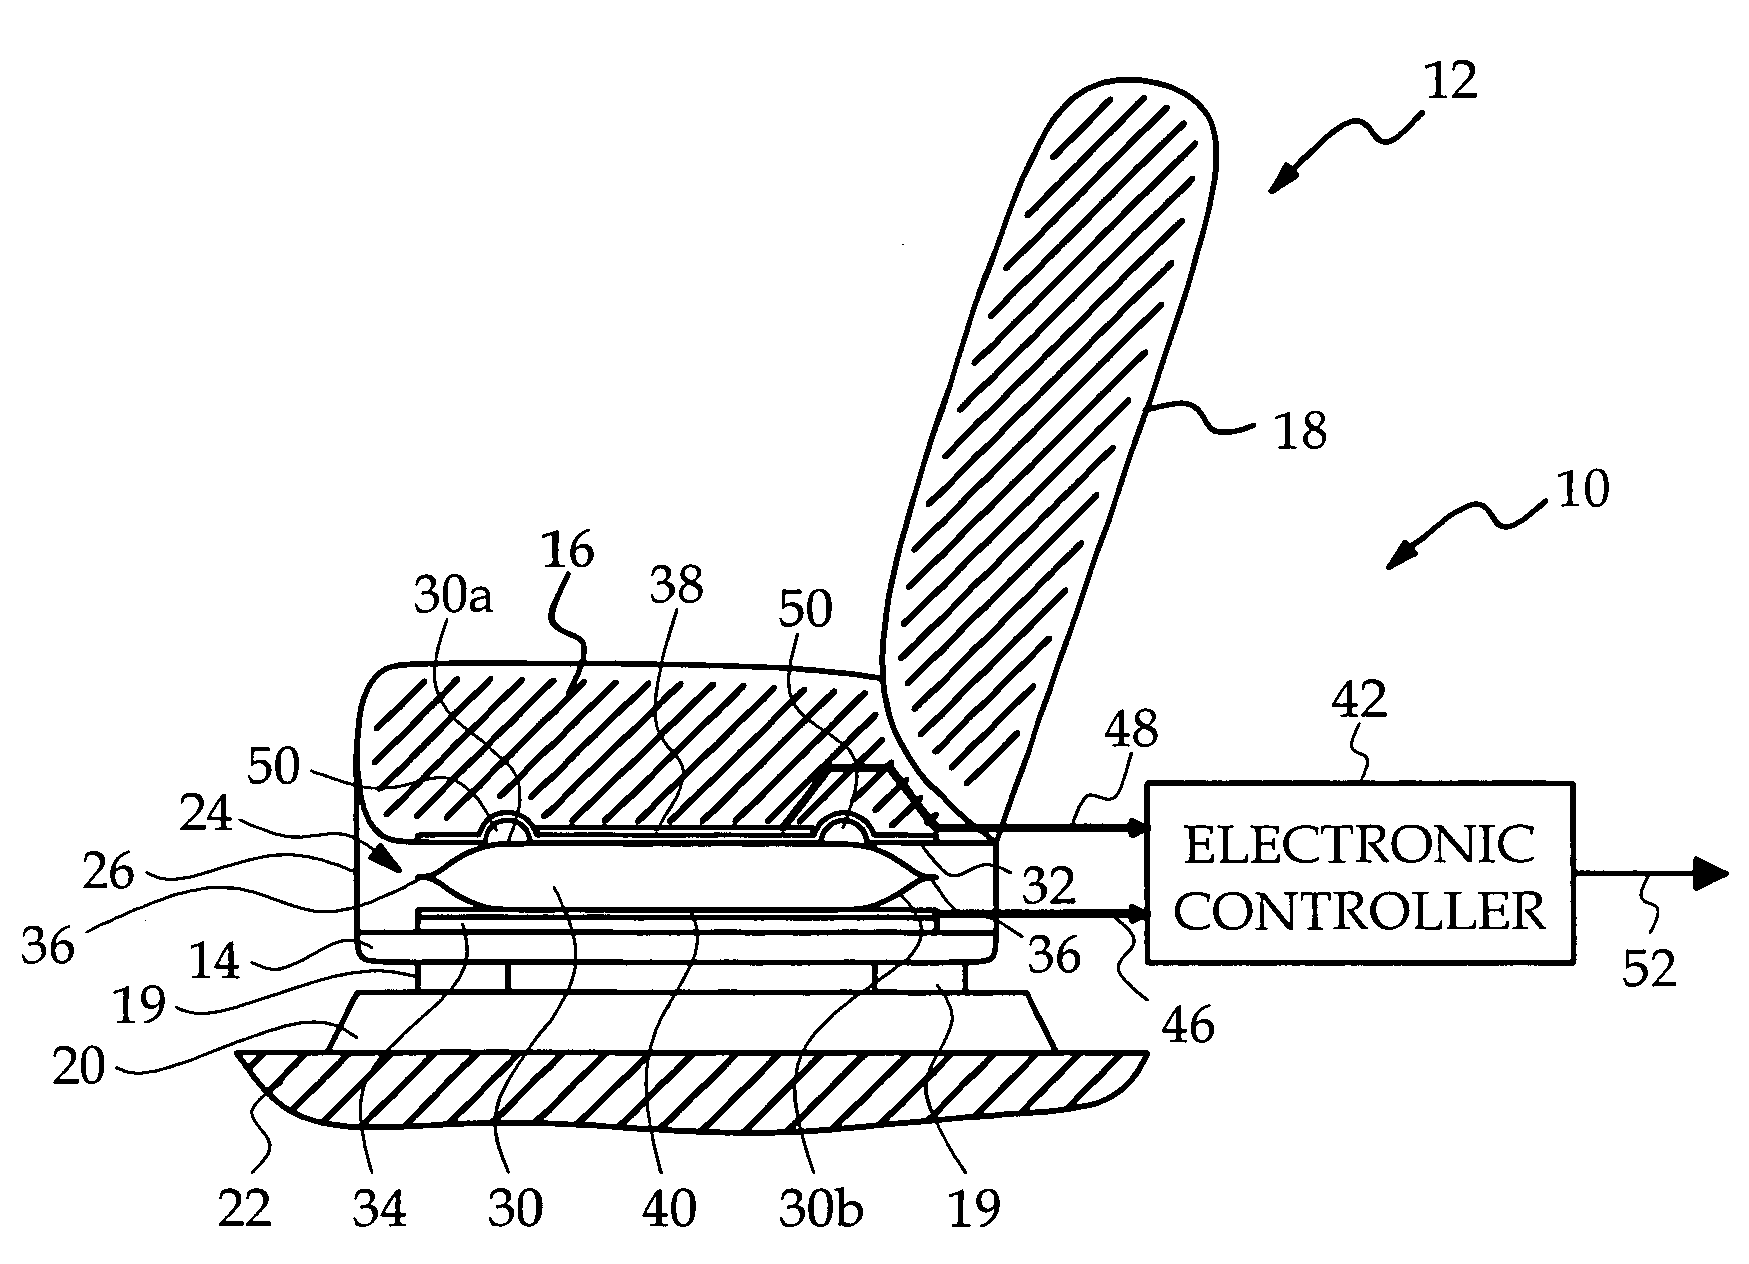 Capacitive occupant presence detection apparatus for a vehicle seat